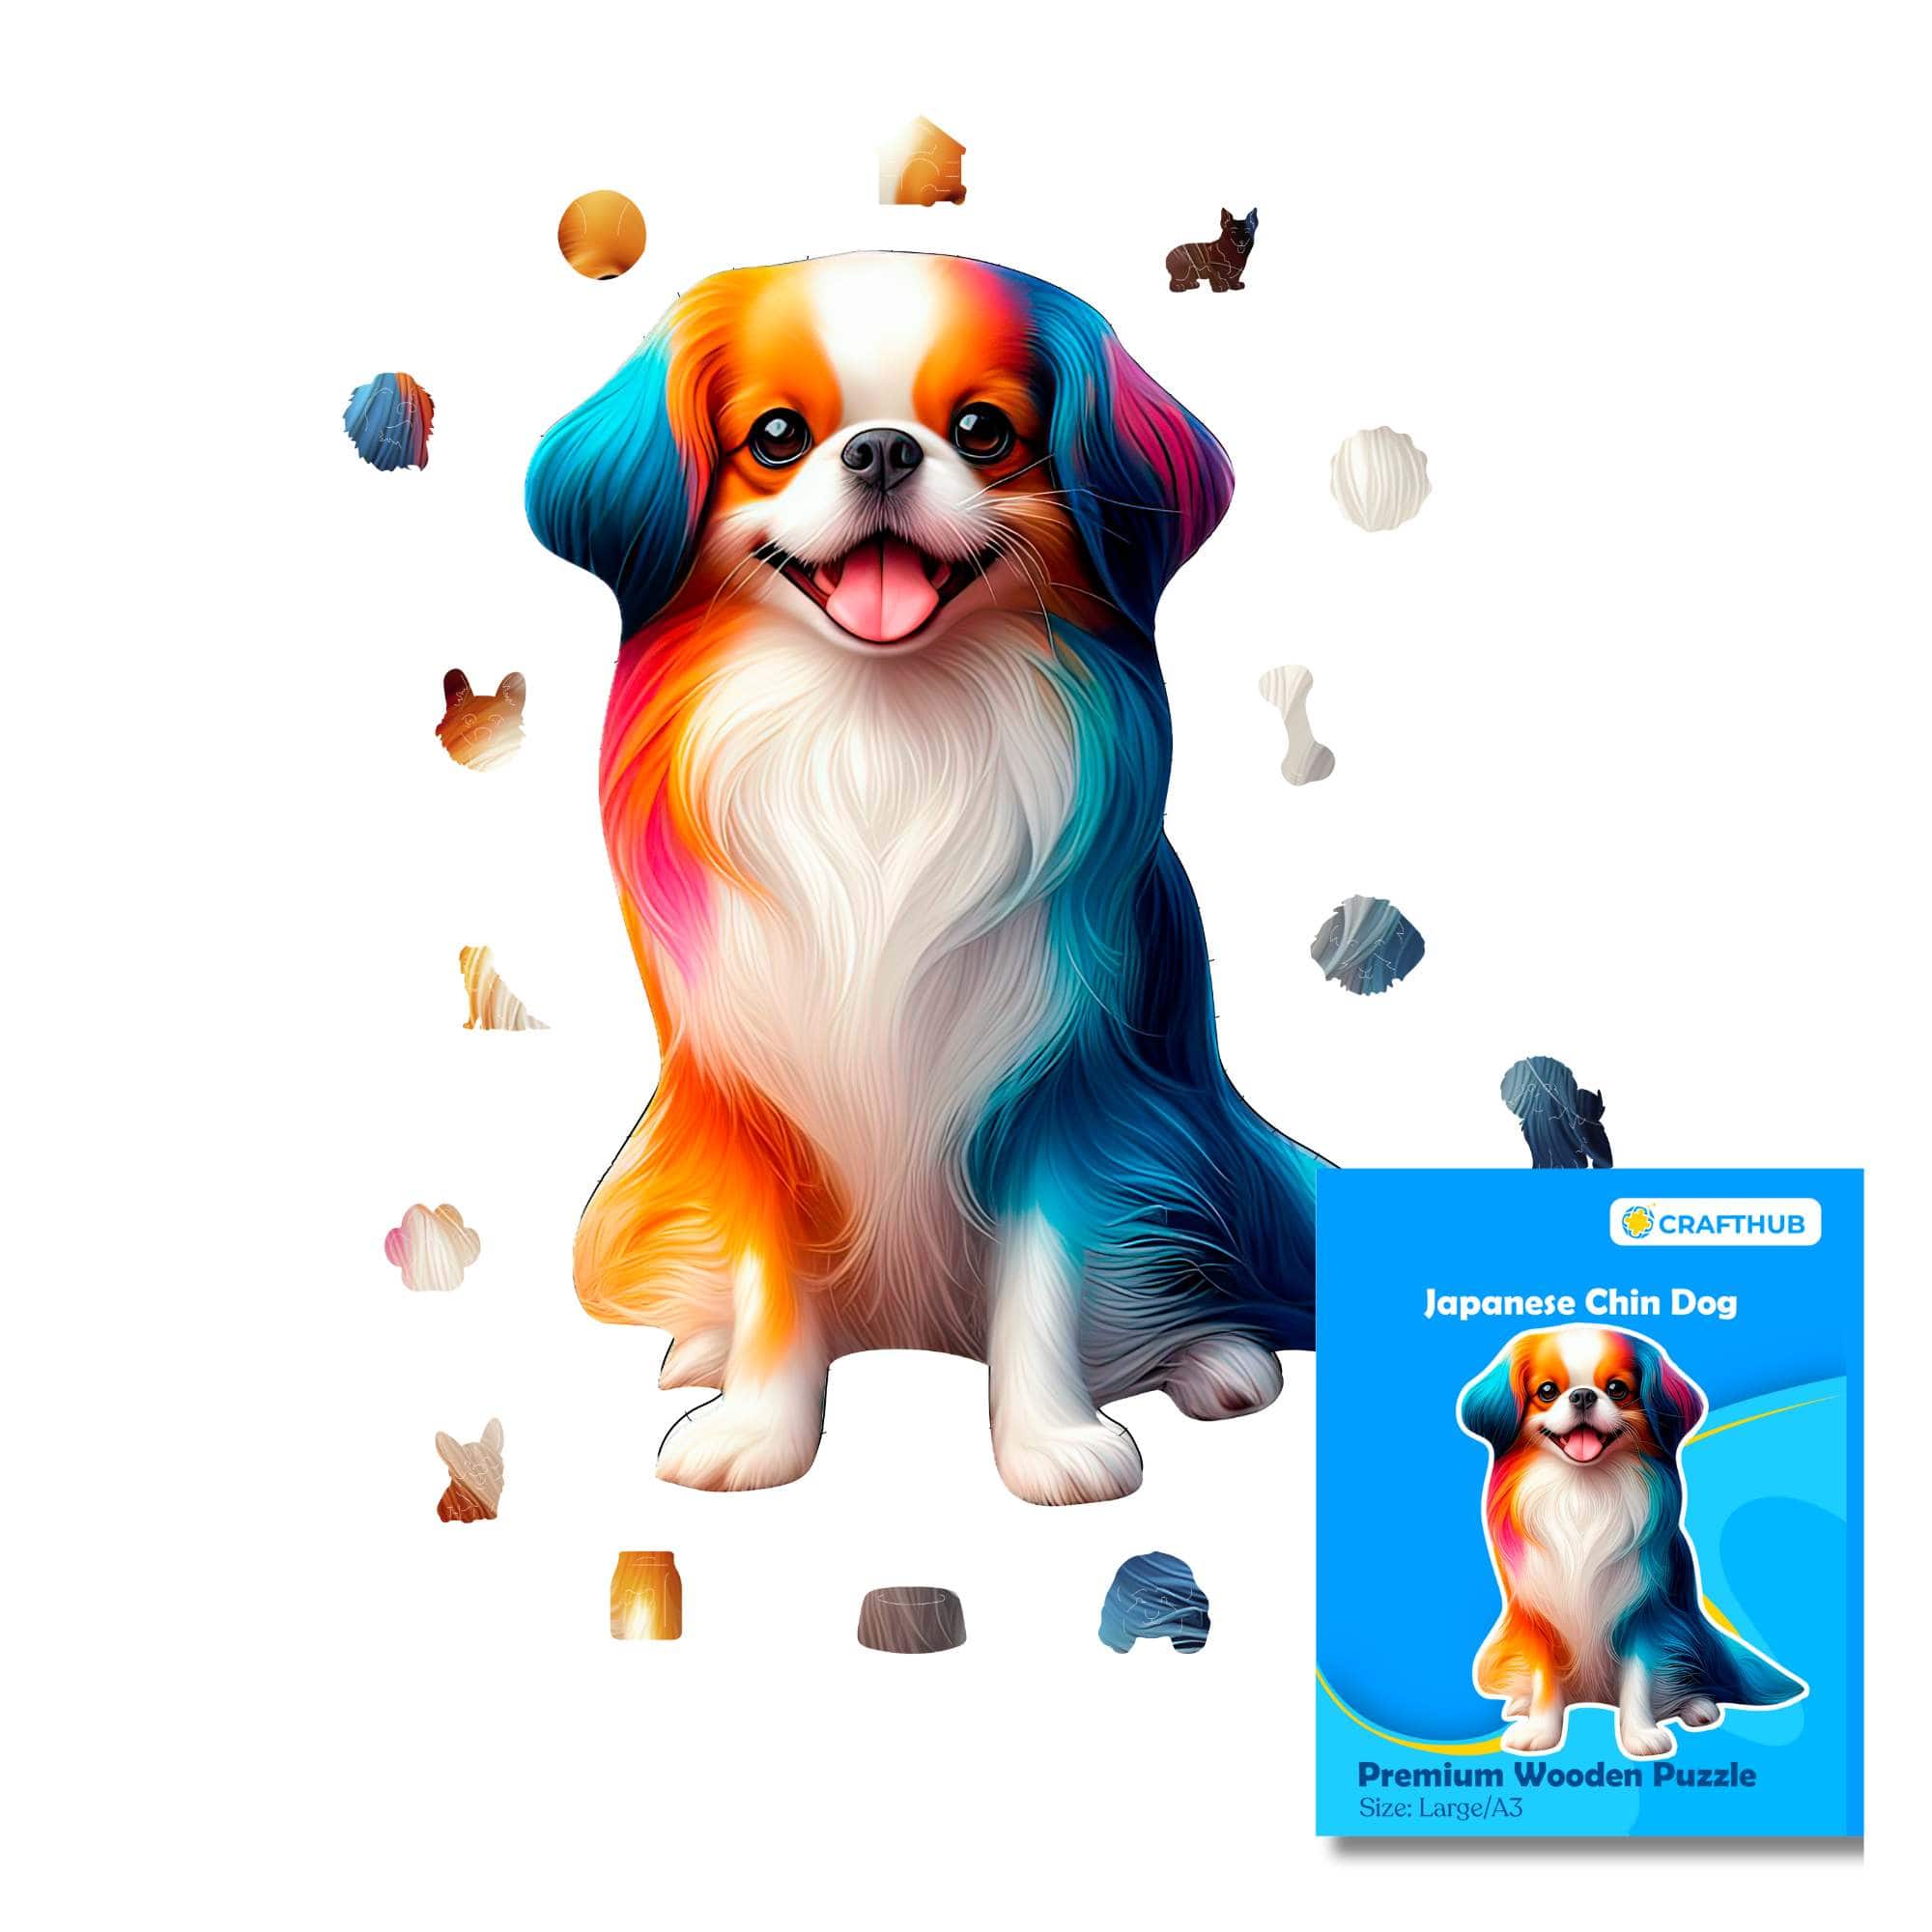 Animal Jigsaw Puzzle > Wooden Jigsaw Puzzle > Jigsaw Puzzle Japanese Chin Dog - Jigsaw Puzzle